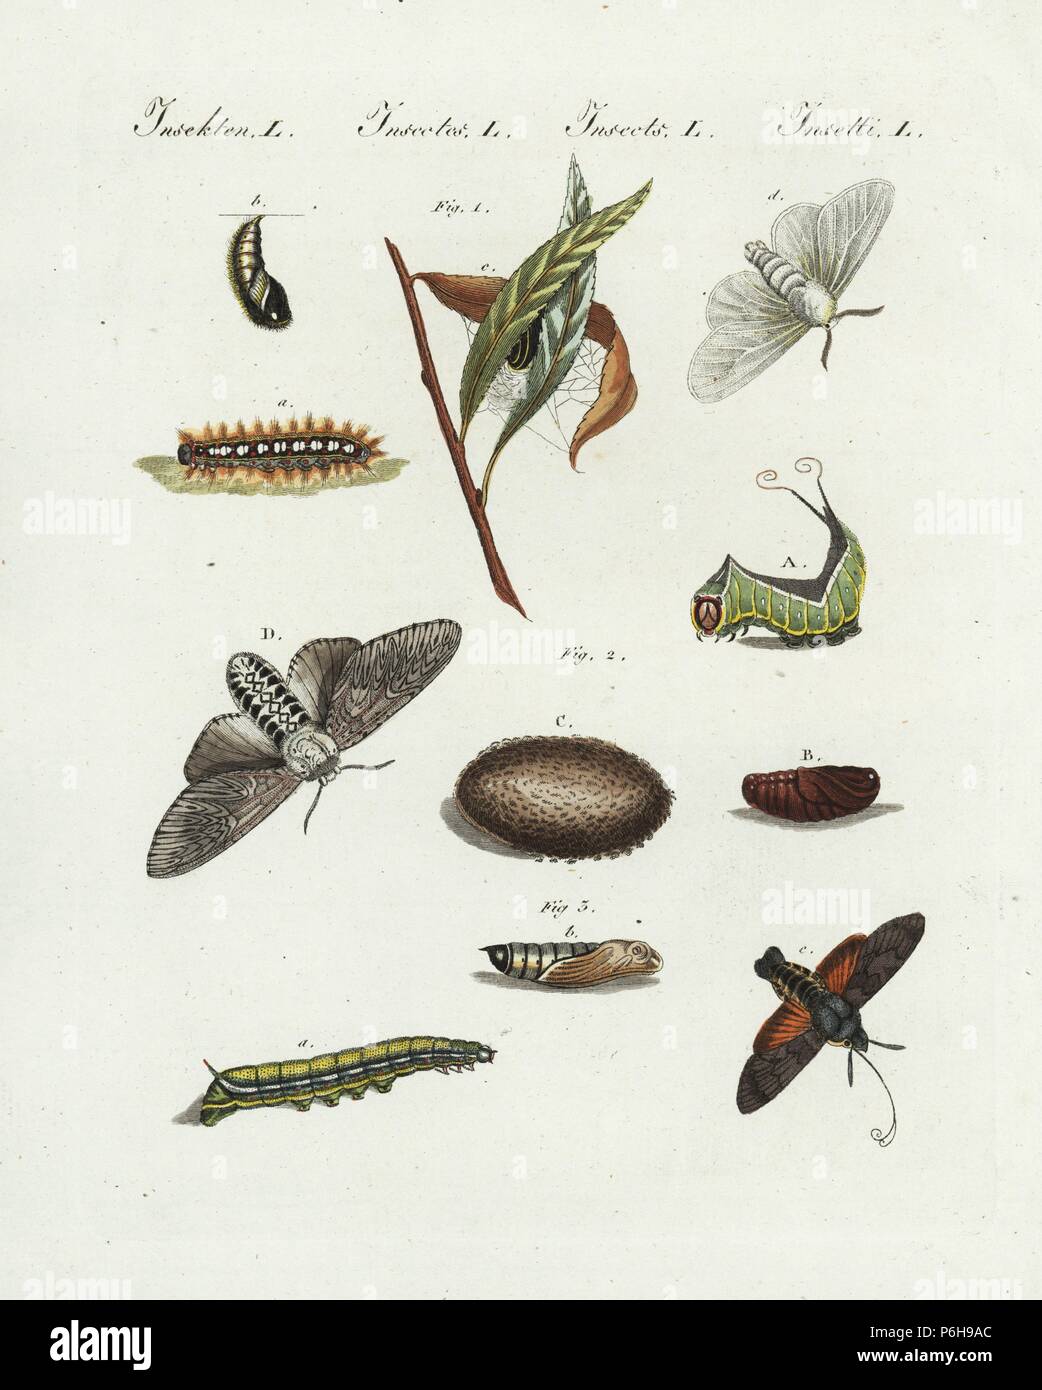 White satin moth, Leucoma salicis 1, puss moth, Cerura vinula, and hummingbird hawk-moth, Macroglossum stellatarum 3, moth, larva, caterillar, pupa. Handcoloured copperplate engraving from Bertuch's 'Bilderbuch fur Kinder' (Picture Book for Children), Weimar, 1807. Friedrich Johann Bertuch (1747-1822) was a German publisher and man of arts most famous for his 12-volume encyclopedia for children illustrated with 1,200 engraved plates on natural history, science, costume, mythology, etc., published from 1790-1830. Stock Photo